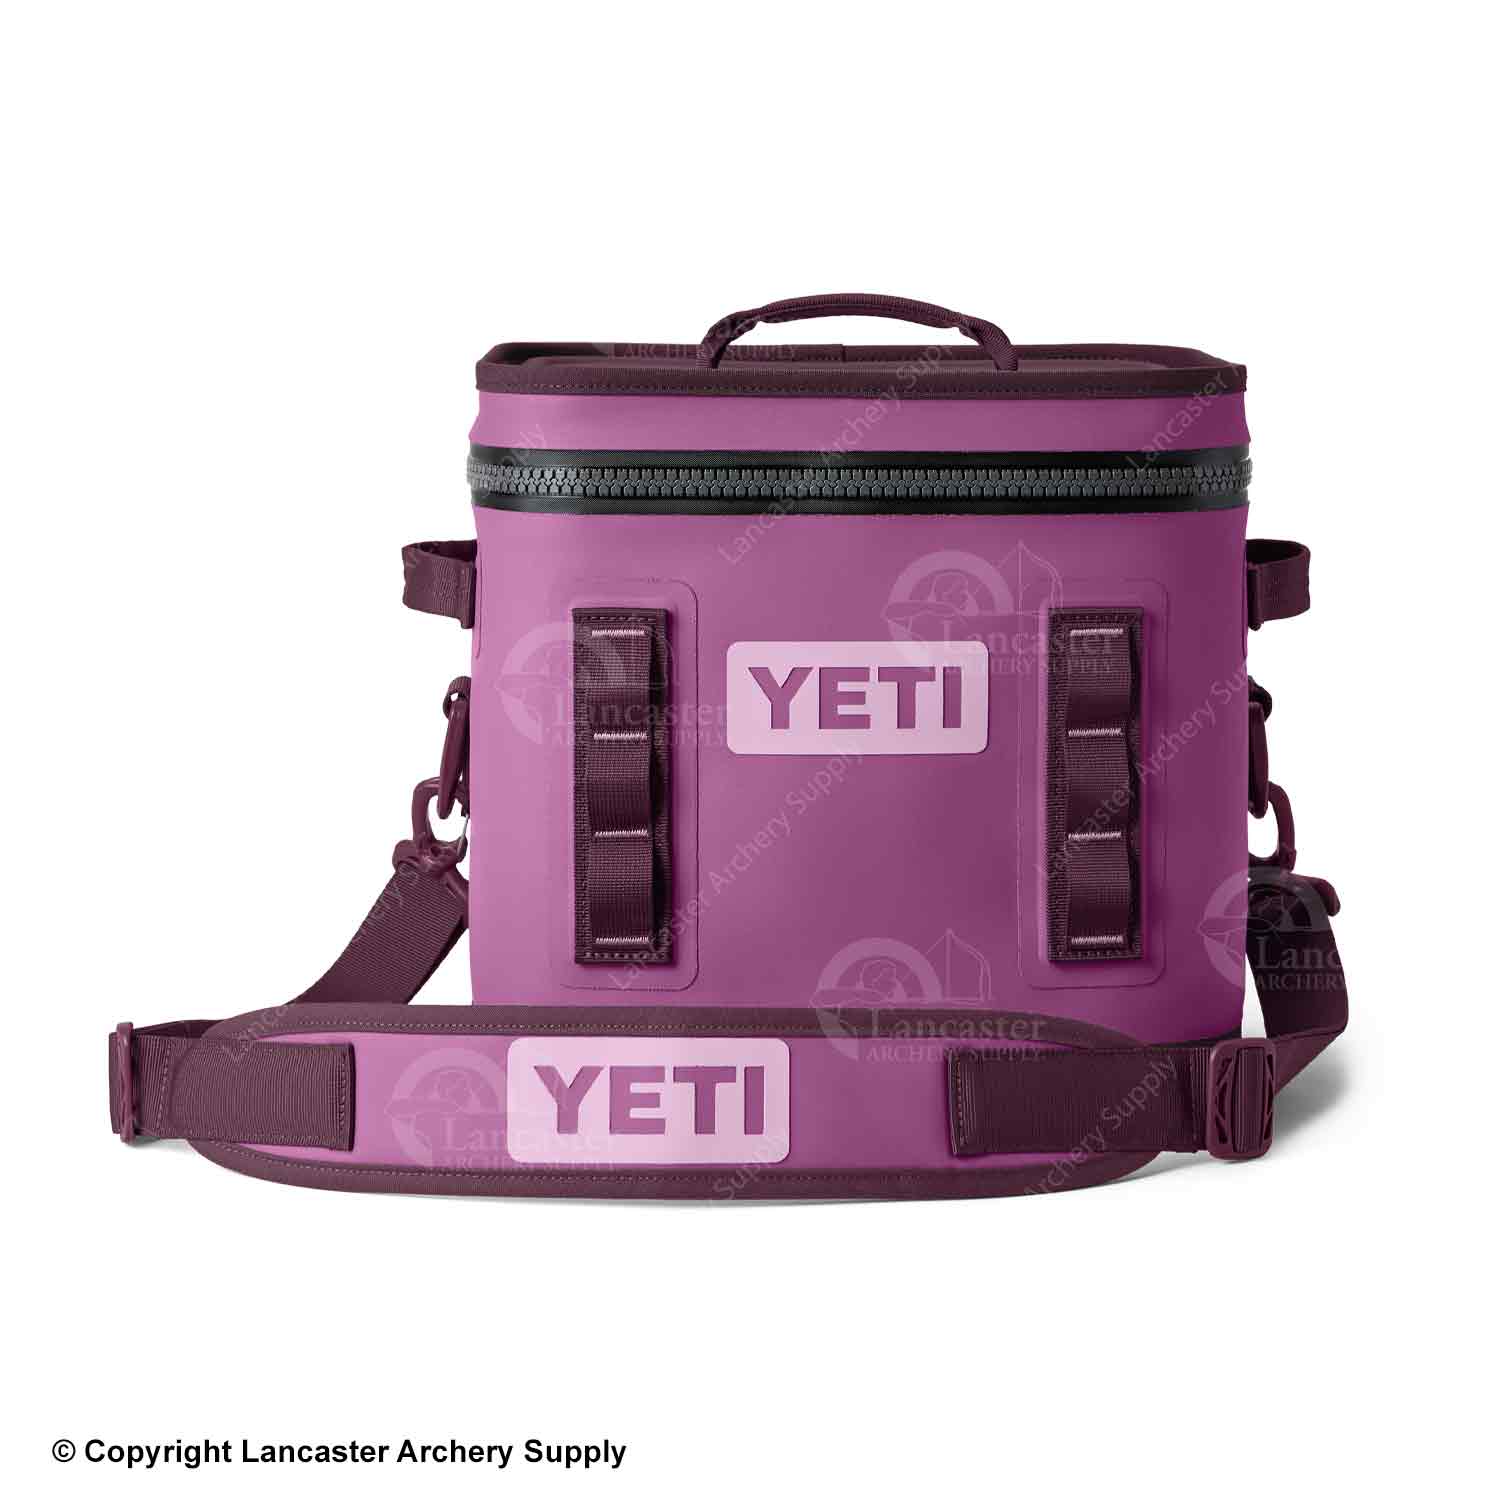 YETI's Hopper M20 Backpack Soft Cooler Is Puncture Proof